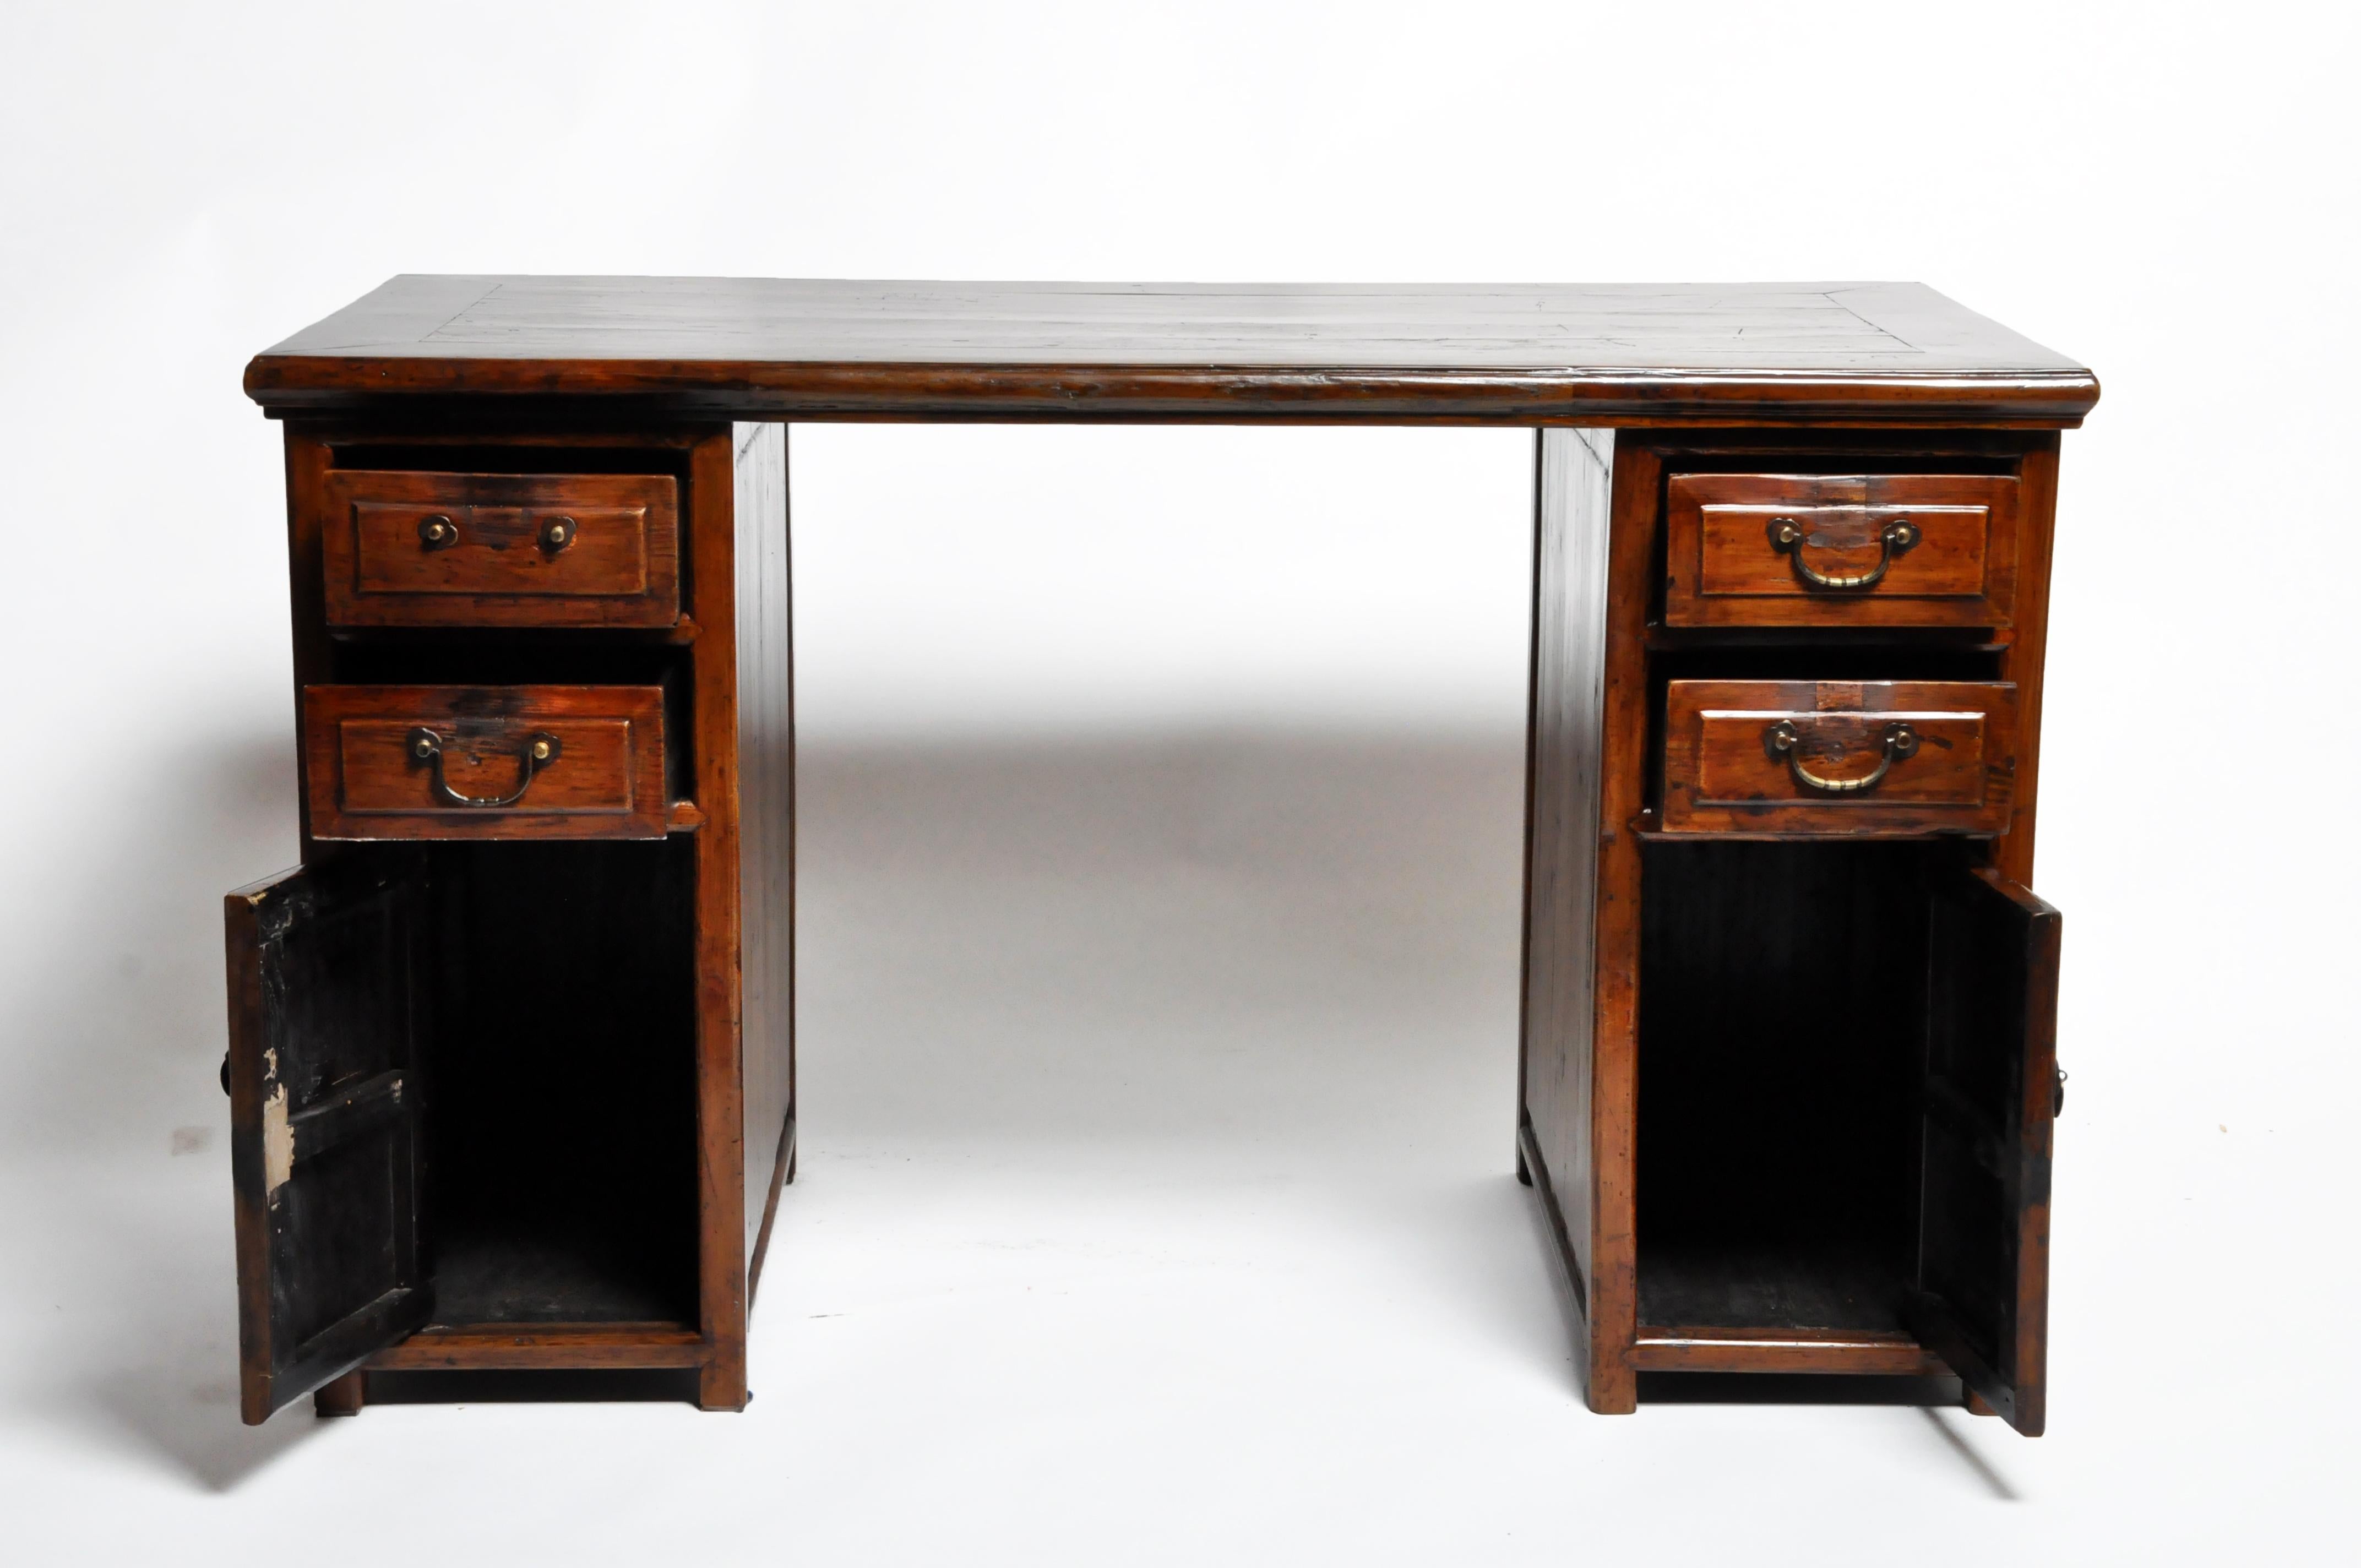 British Colonial Wooden Desk with Four Drawers and Two Doors 3